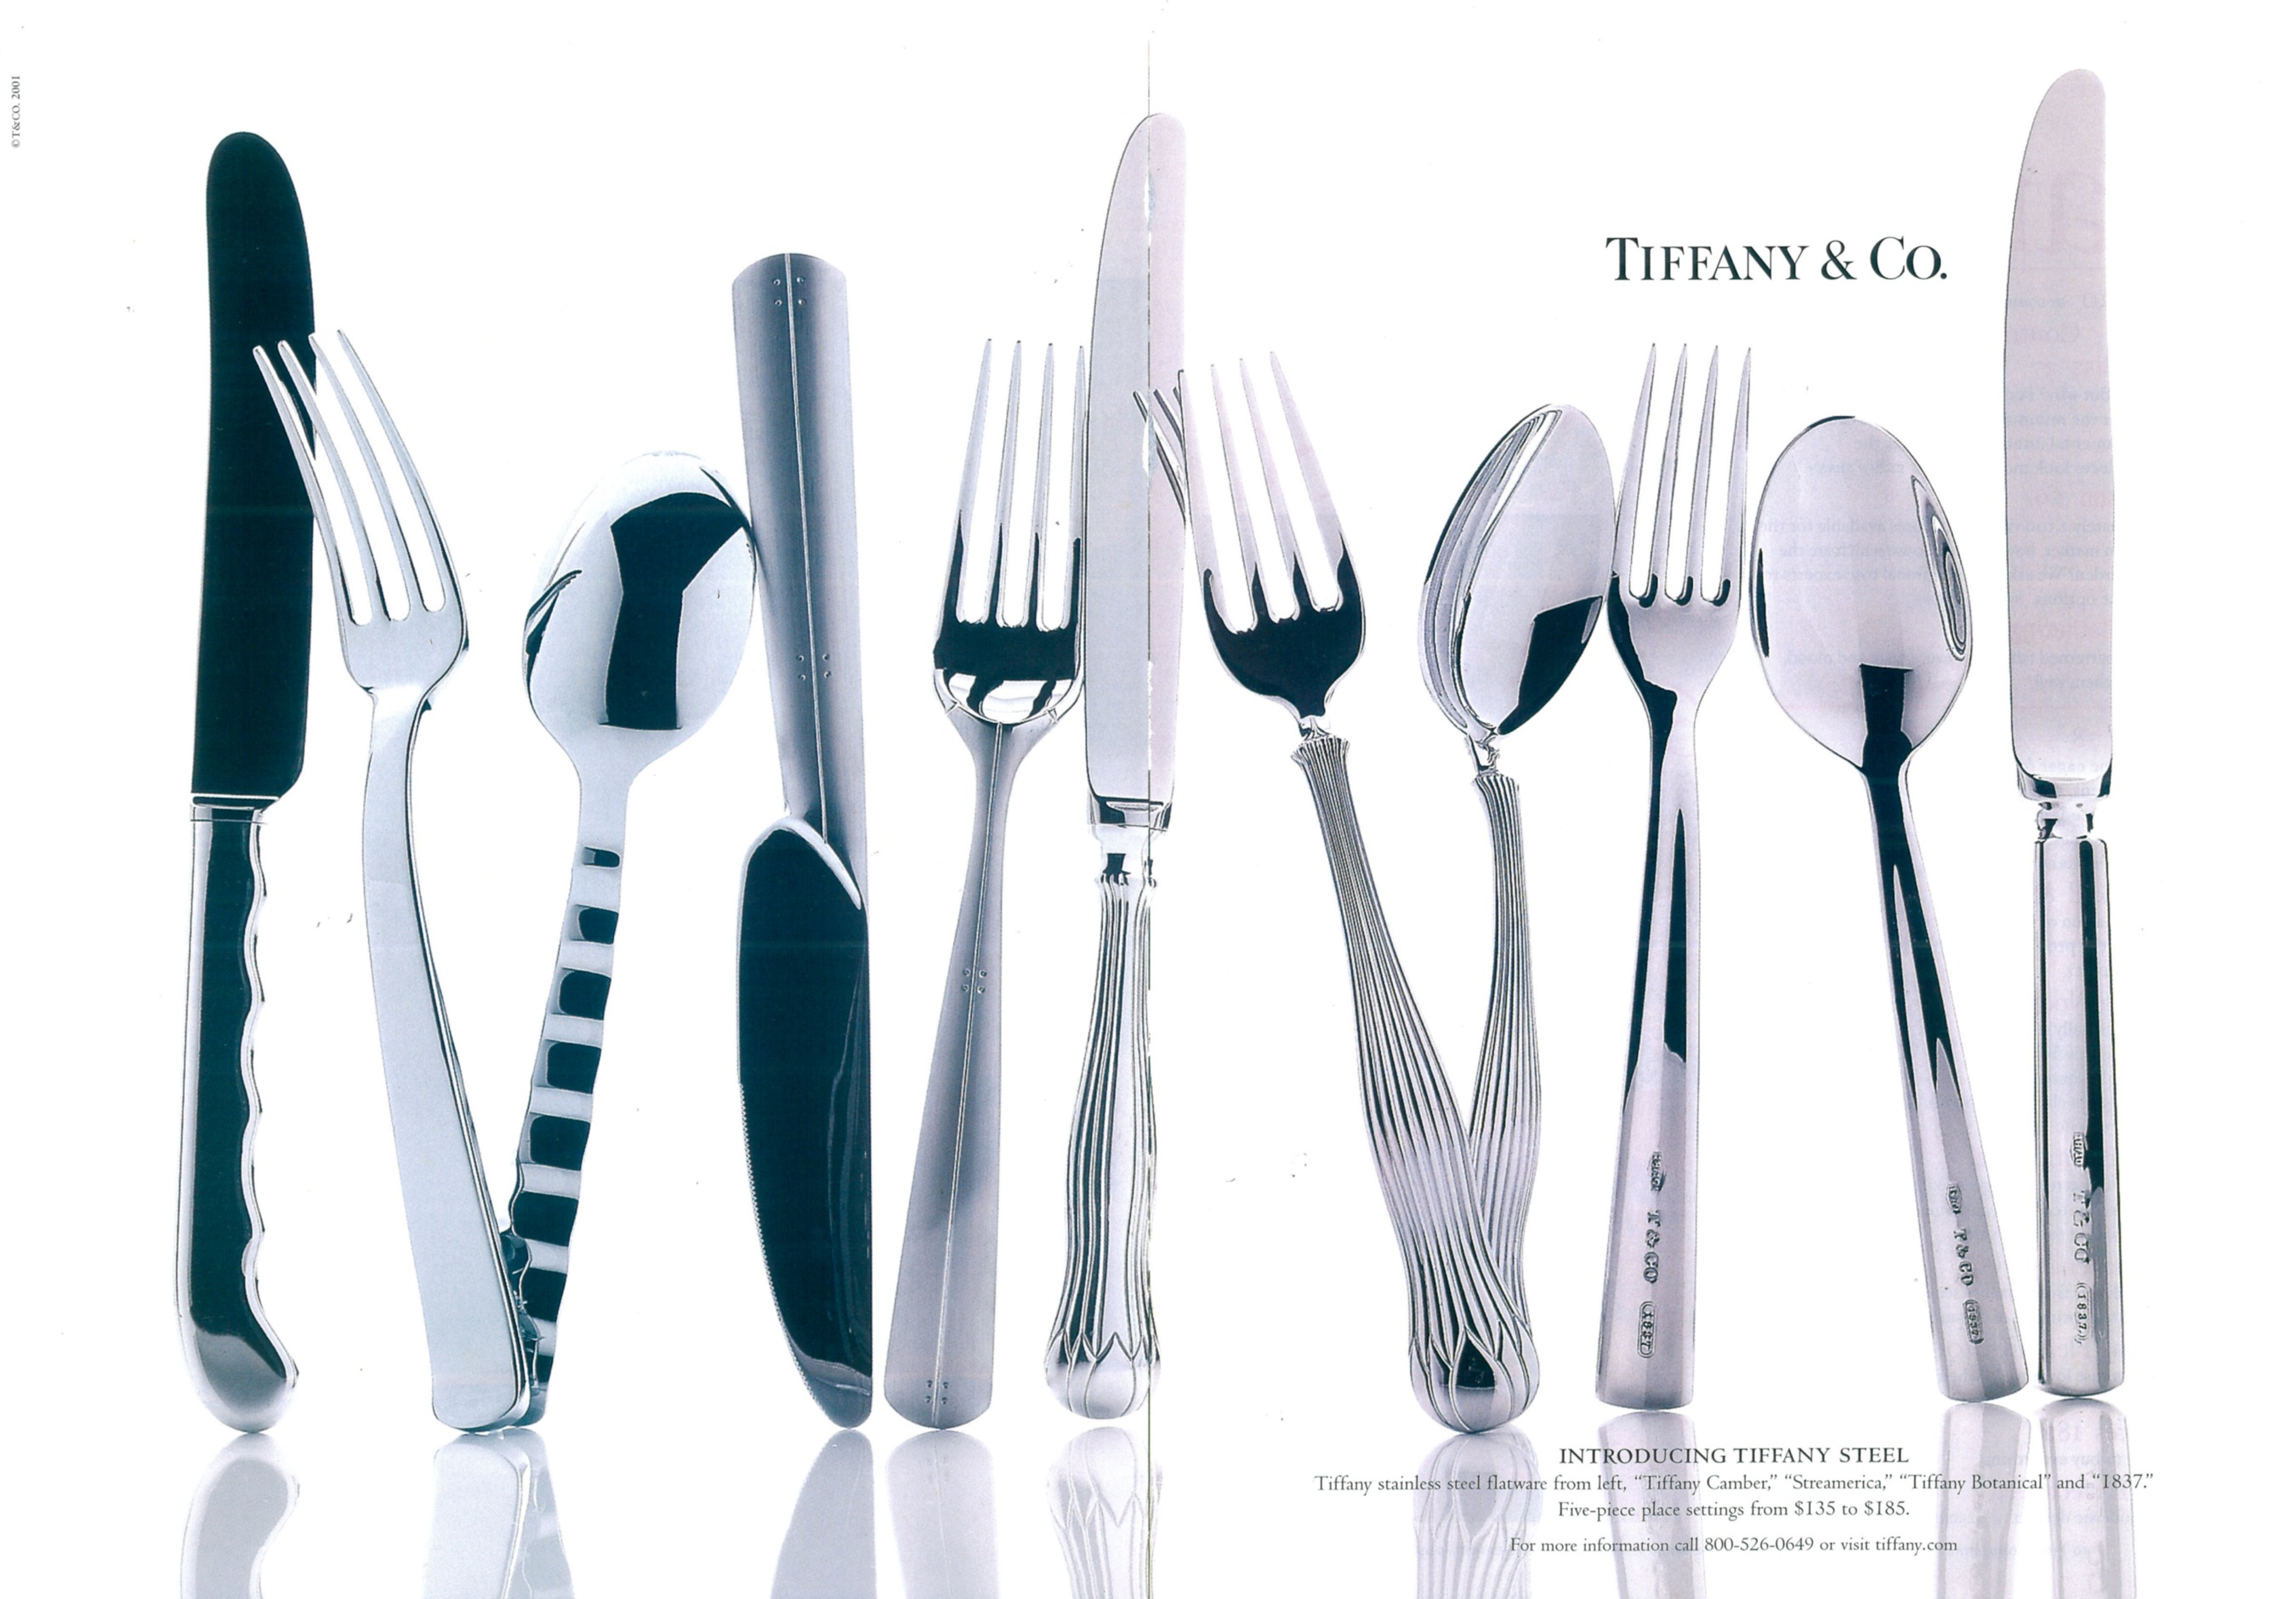 Streamerica Tiffany & Co. Flatware Place Setting Cutlery Stainless Steel Fork Knife Spoon Tableware 2000 Magazine advertisement prices pricelist